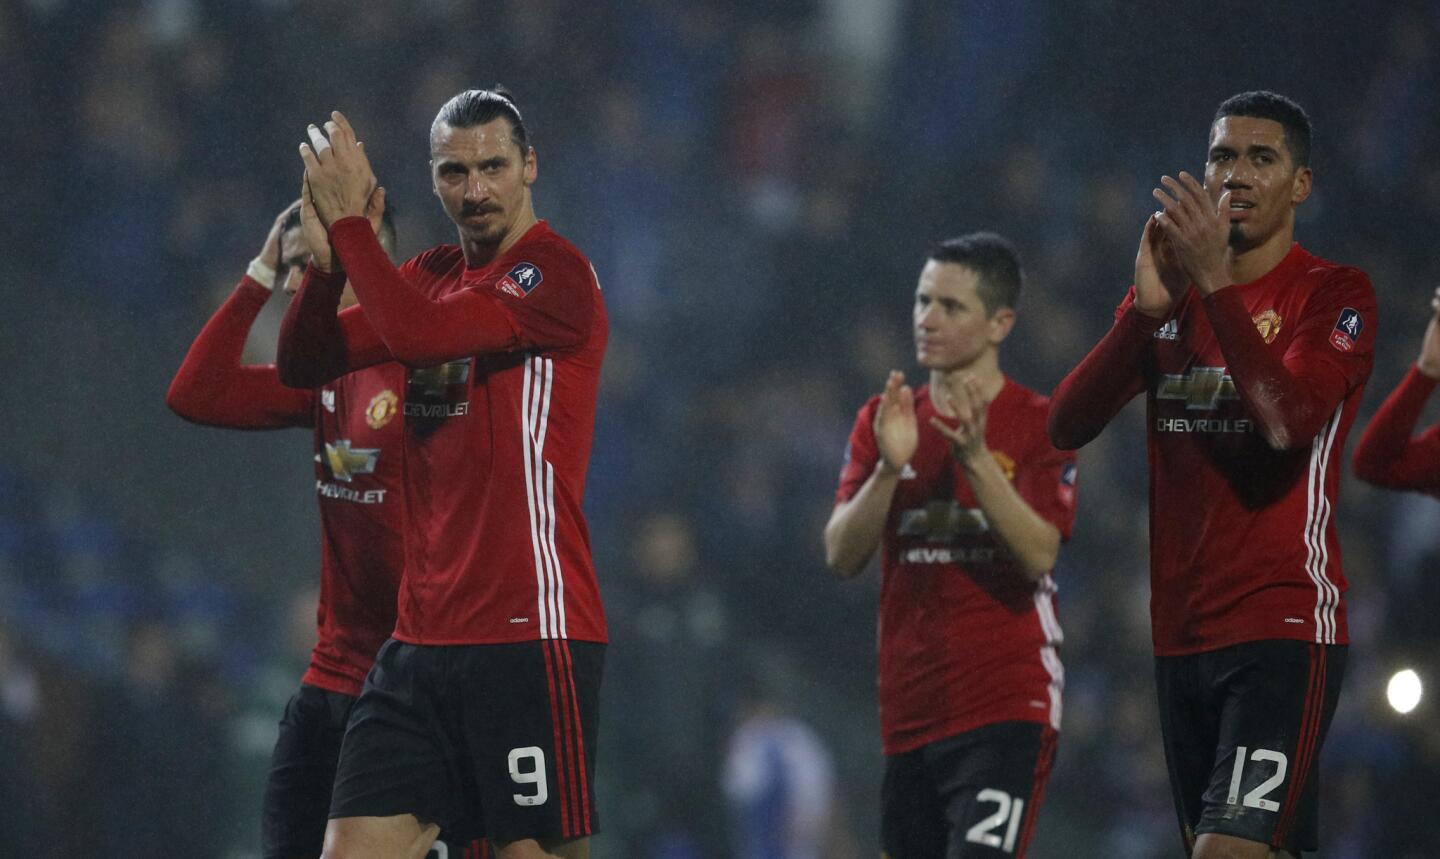 Manchester United's Zlatan Ibrahimovic, Ander Herrera and Chris Smalling applaud fans after the game